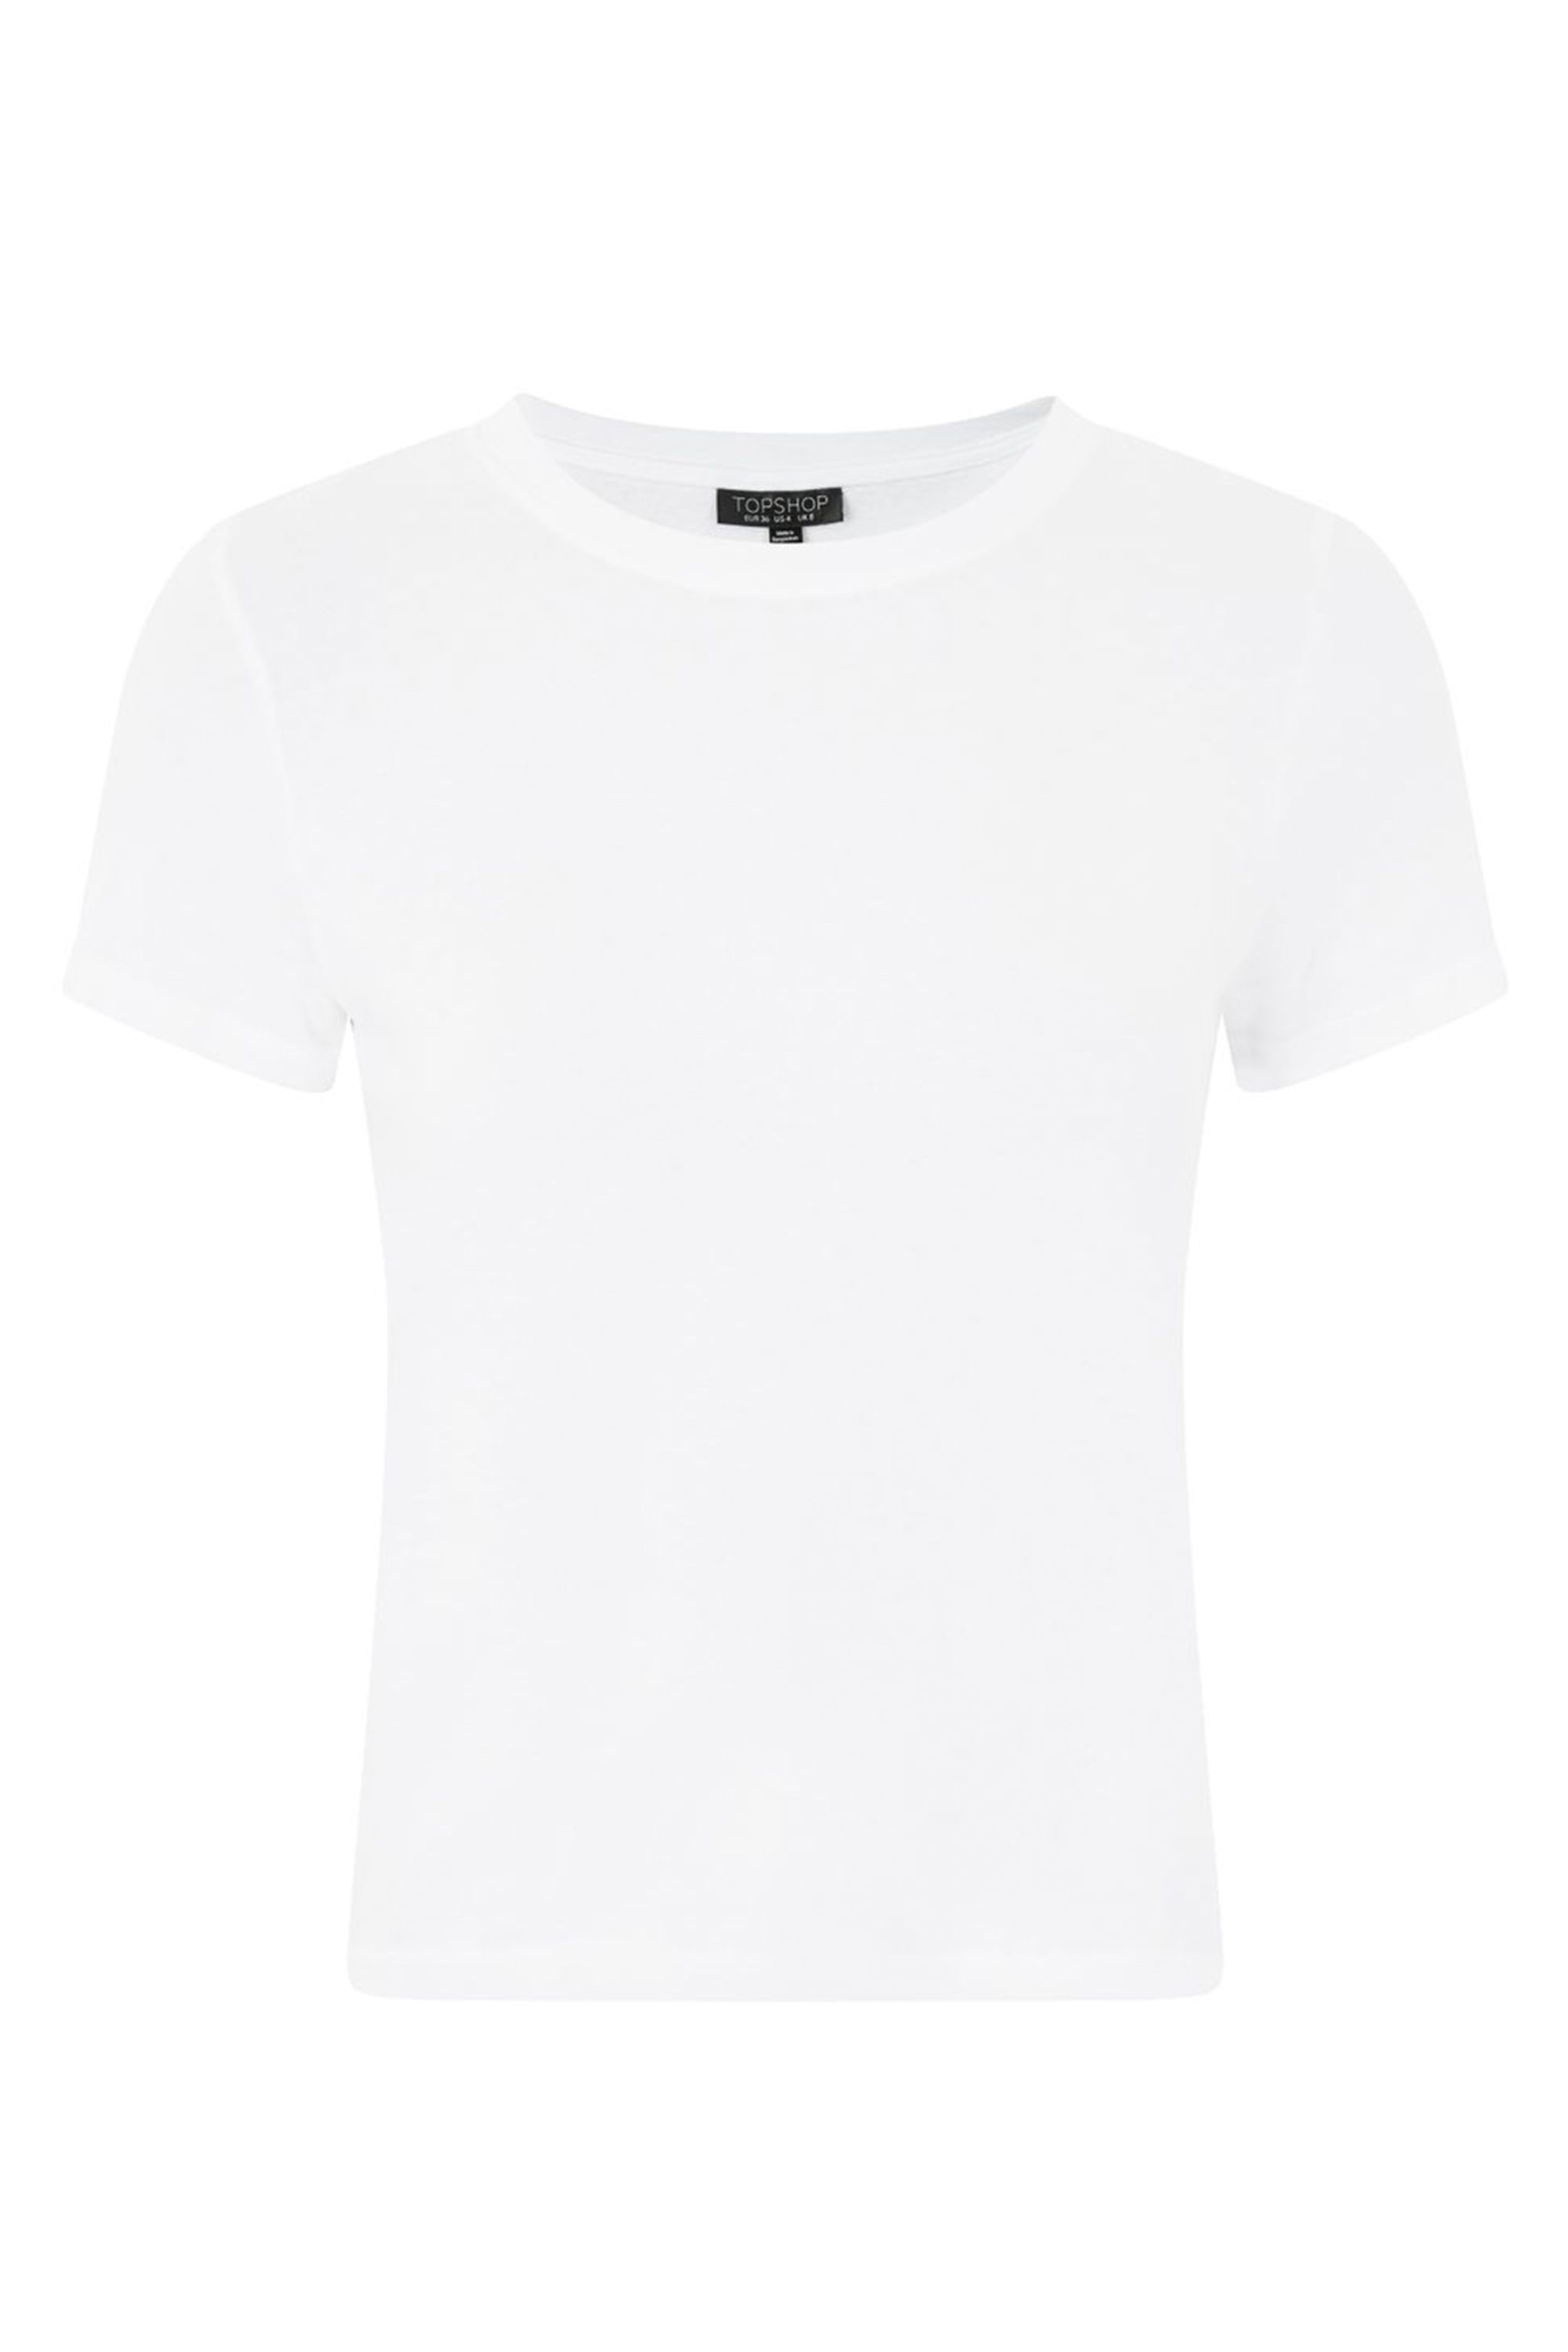 T-shirt, Clothing, White, Sleeve, Top, Neck, Outerwear, Blouse, 